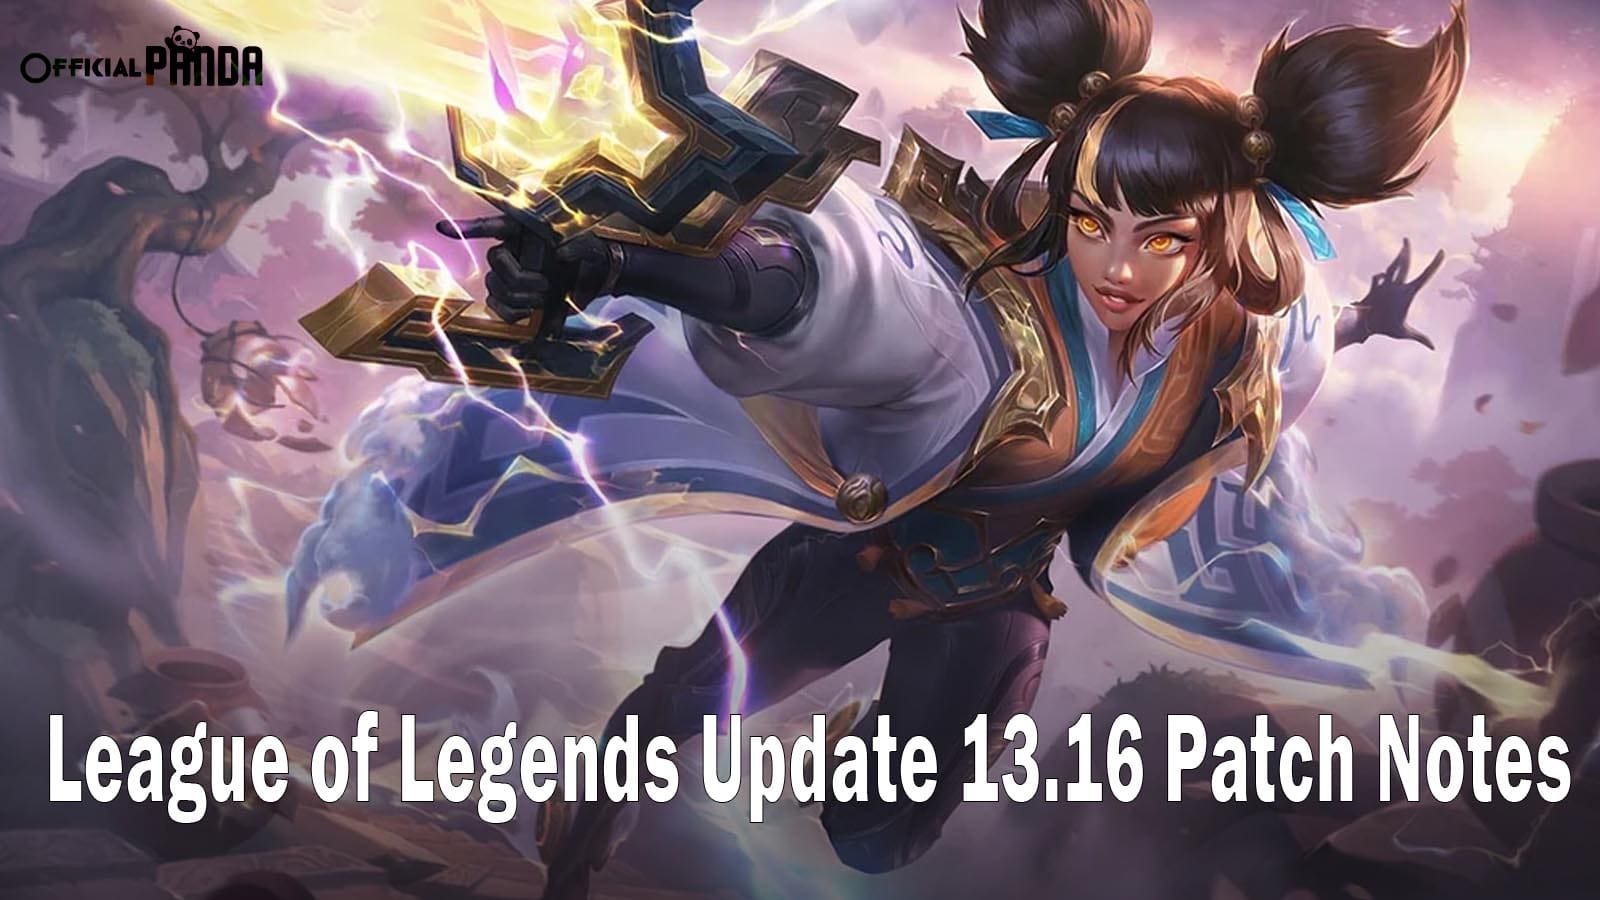 League of Legends Update 13.16 Patch Notes